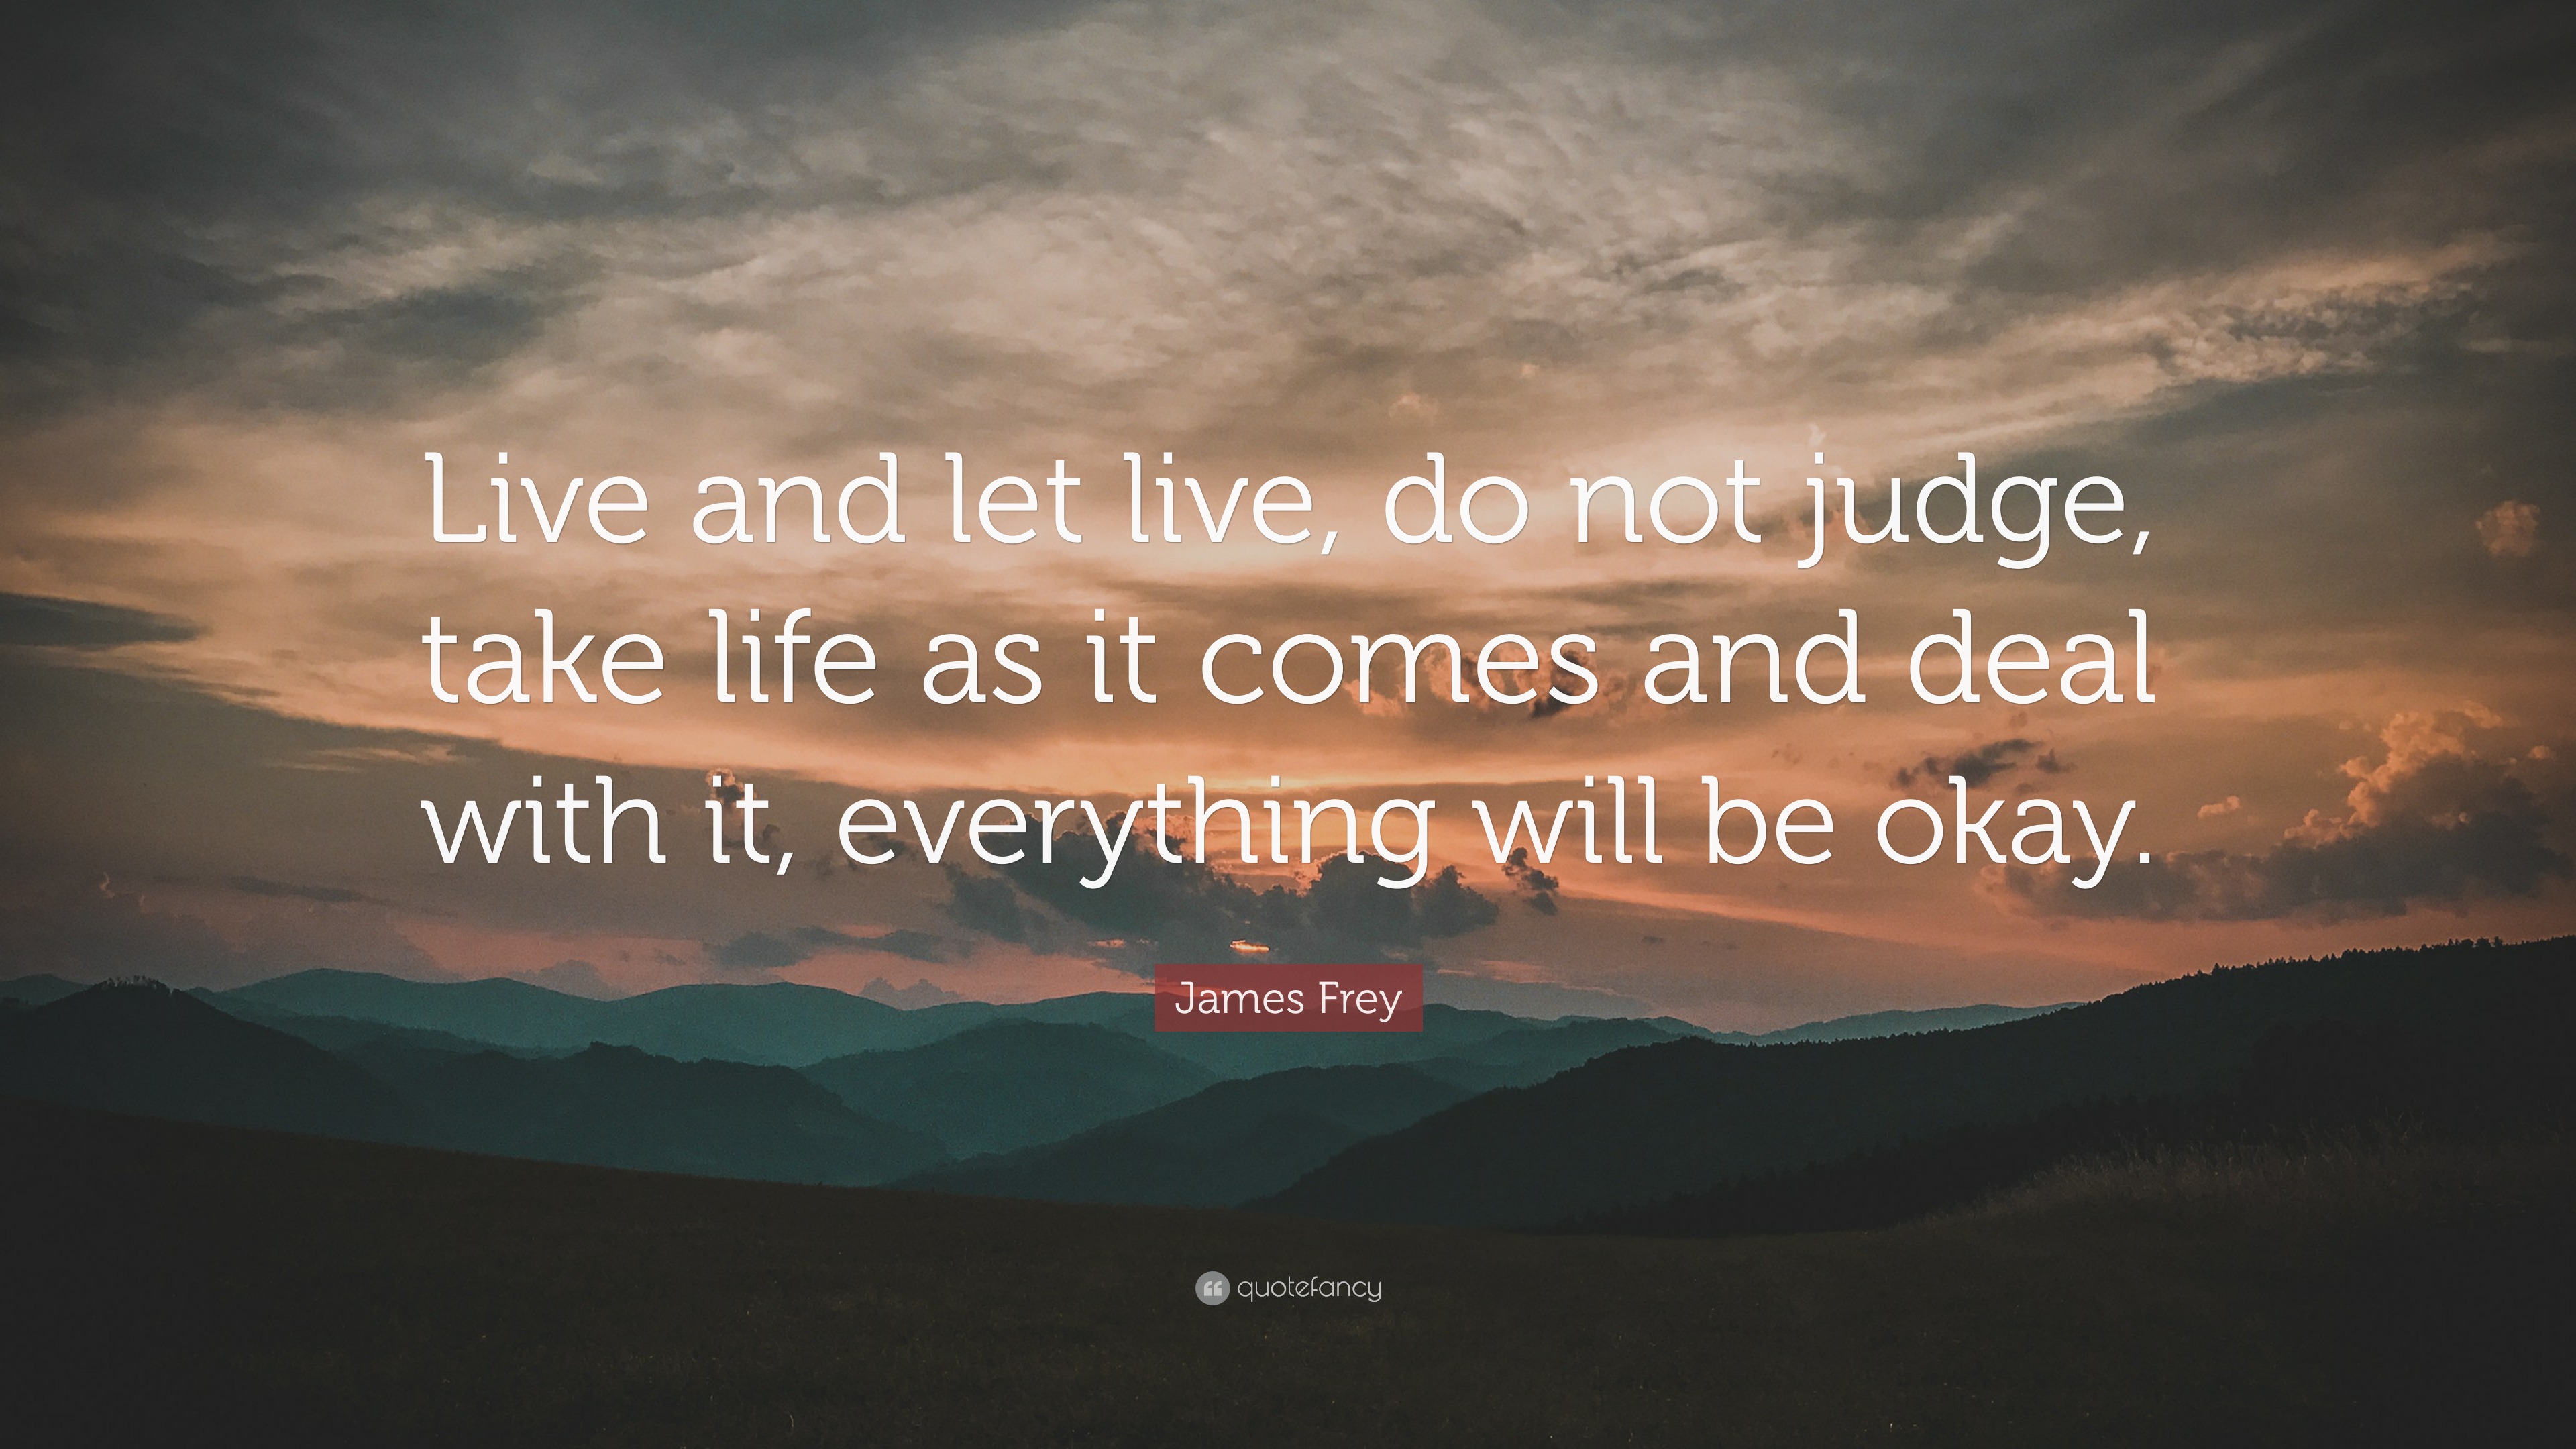 James Frey Quote “Live and let live do not judge take life